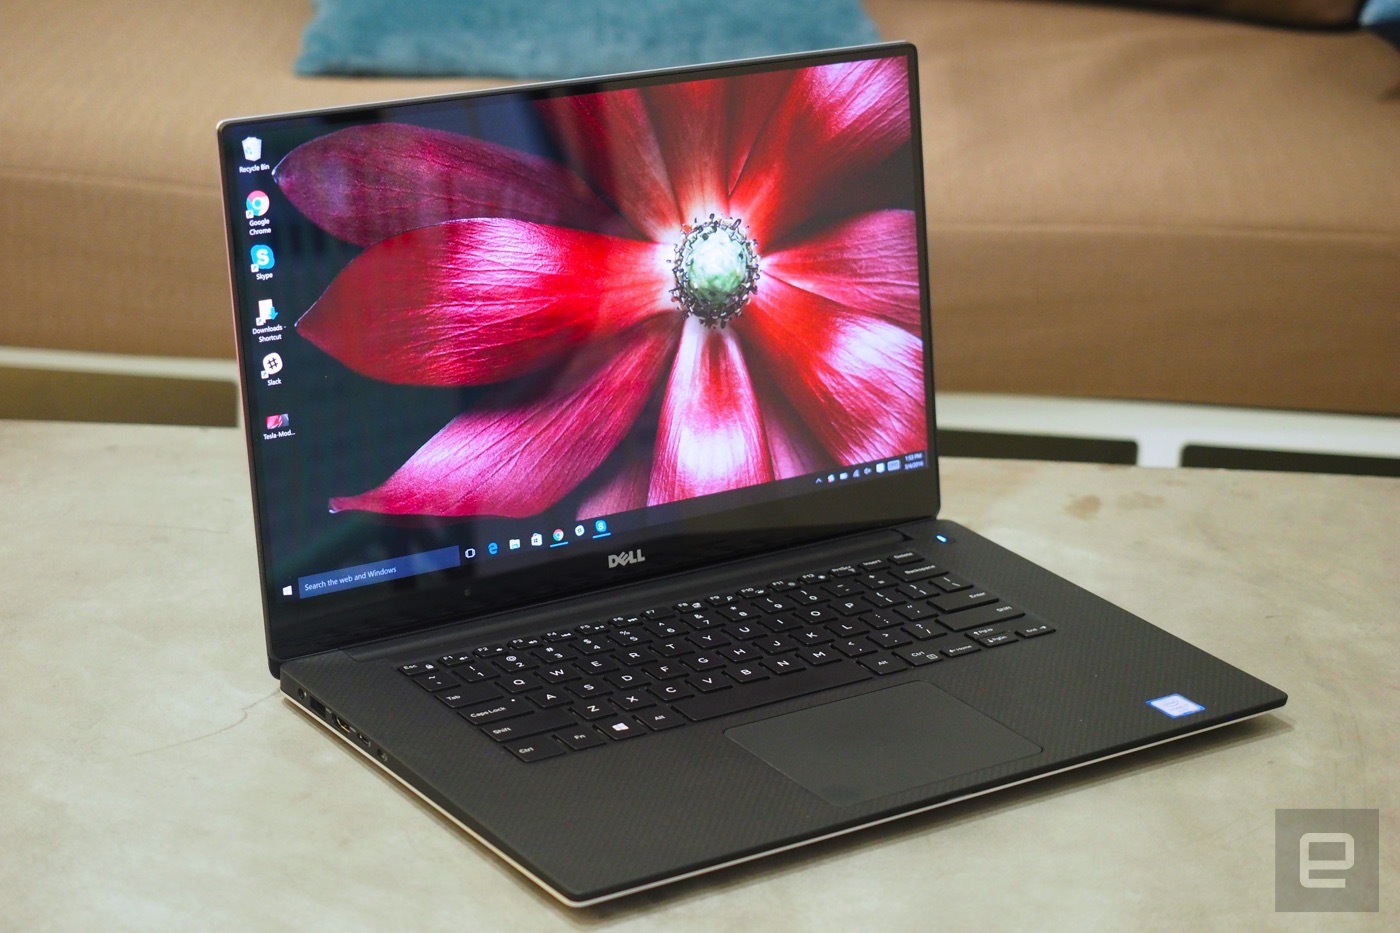 Dell XPS 15 review: A MacBook Pro rival for Windows users